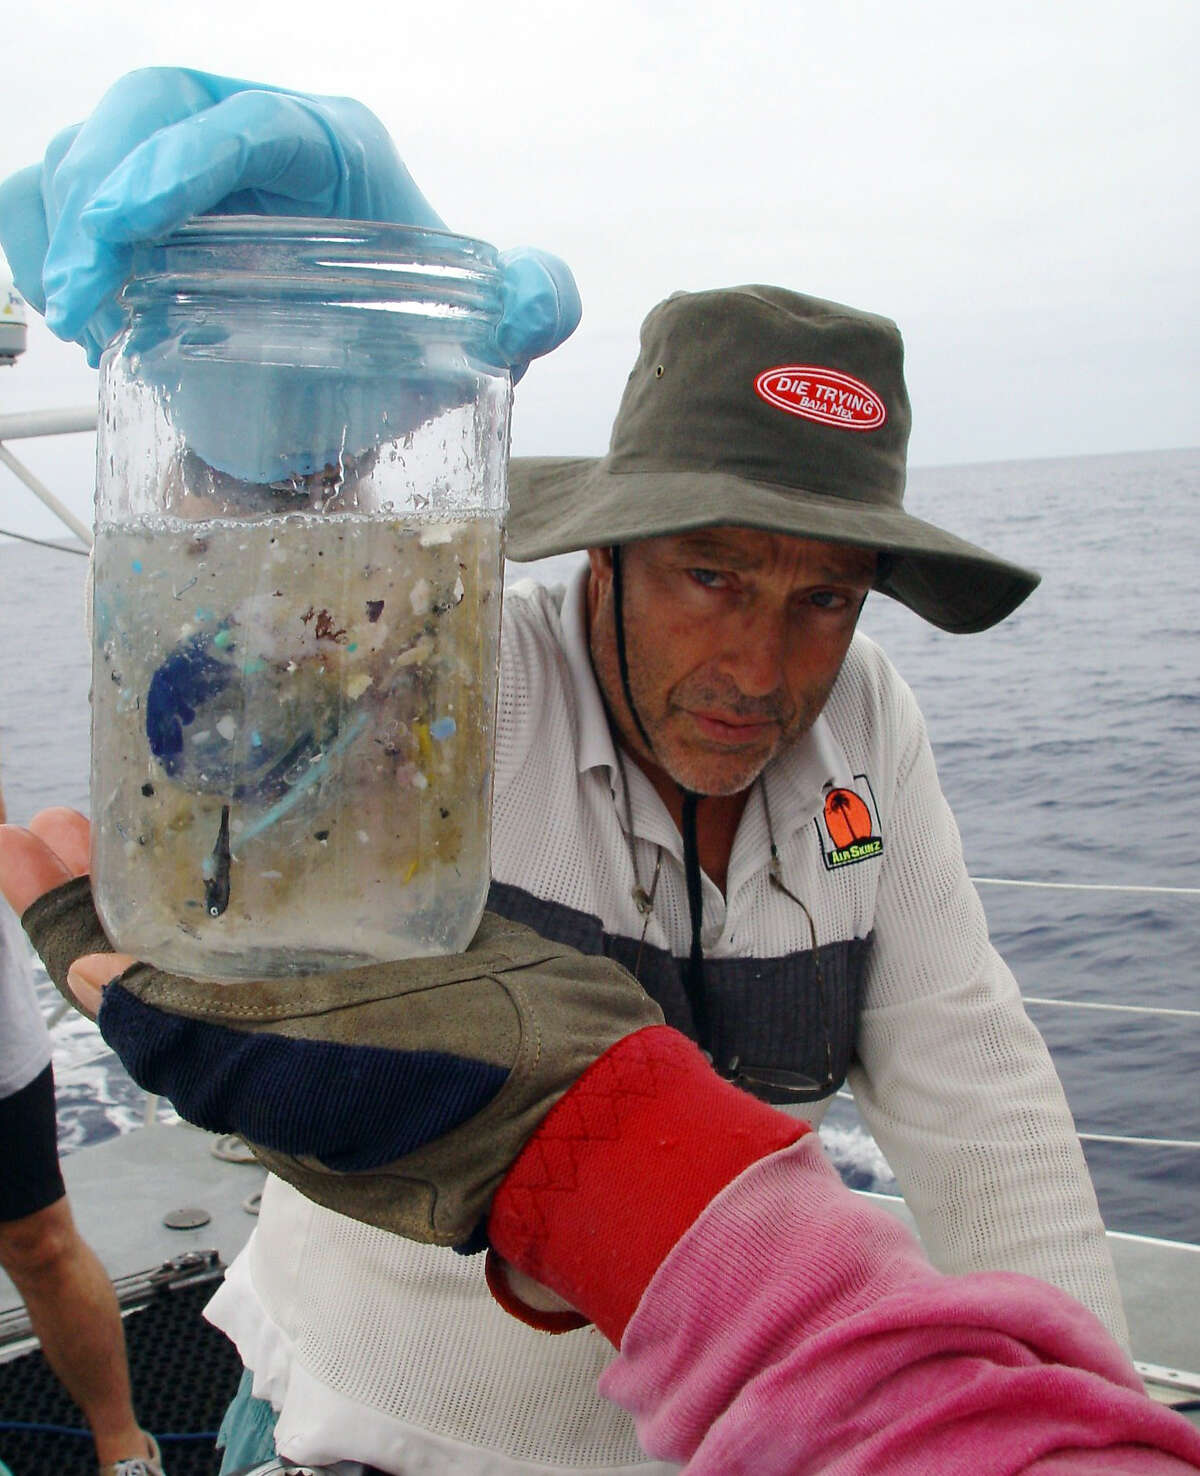 This handout picture shows marine researcher Charles Moore on an expedition in the Pacific Ocean sometime between July through September of 2002. He holds a sample of ocean water from the North Central Pacific Gyre that contains small pieces of plastic. Moore, who works at the Long Beach-based Algalita Marina Research Foundation, has been studying the stew of plastic and marine debris floating in the ocean. Moore has since discovered a second similar garbage patch in the South Pacific.